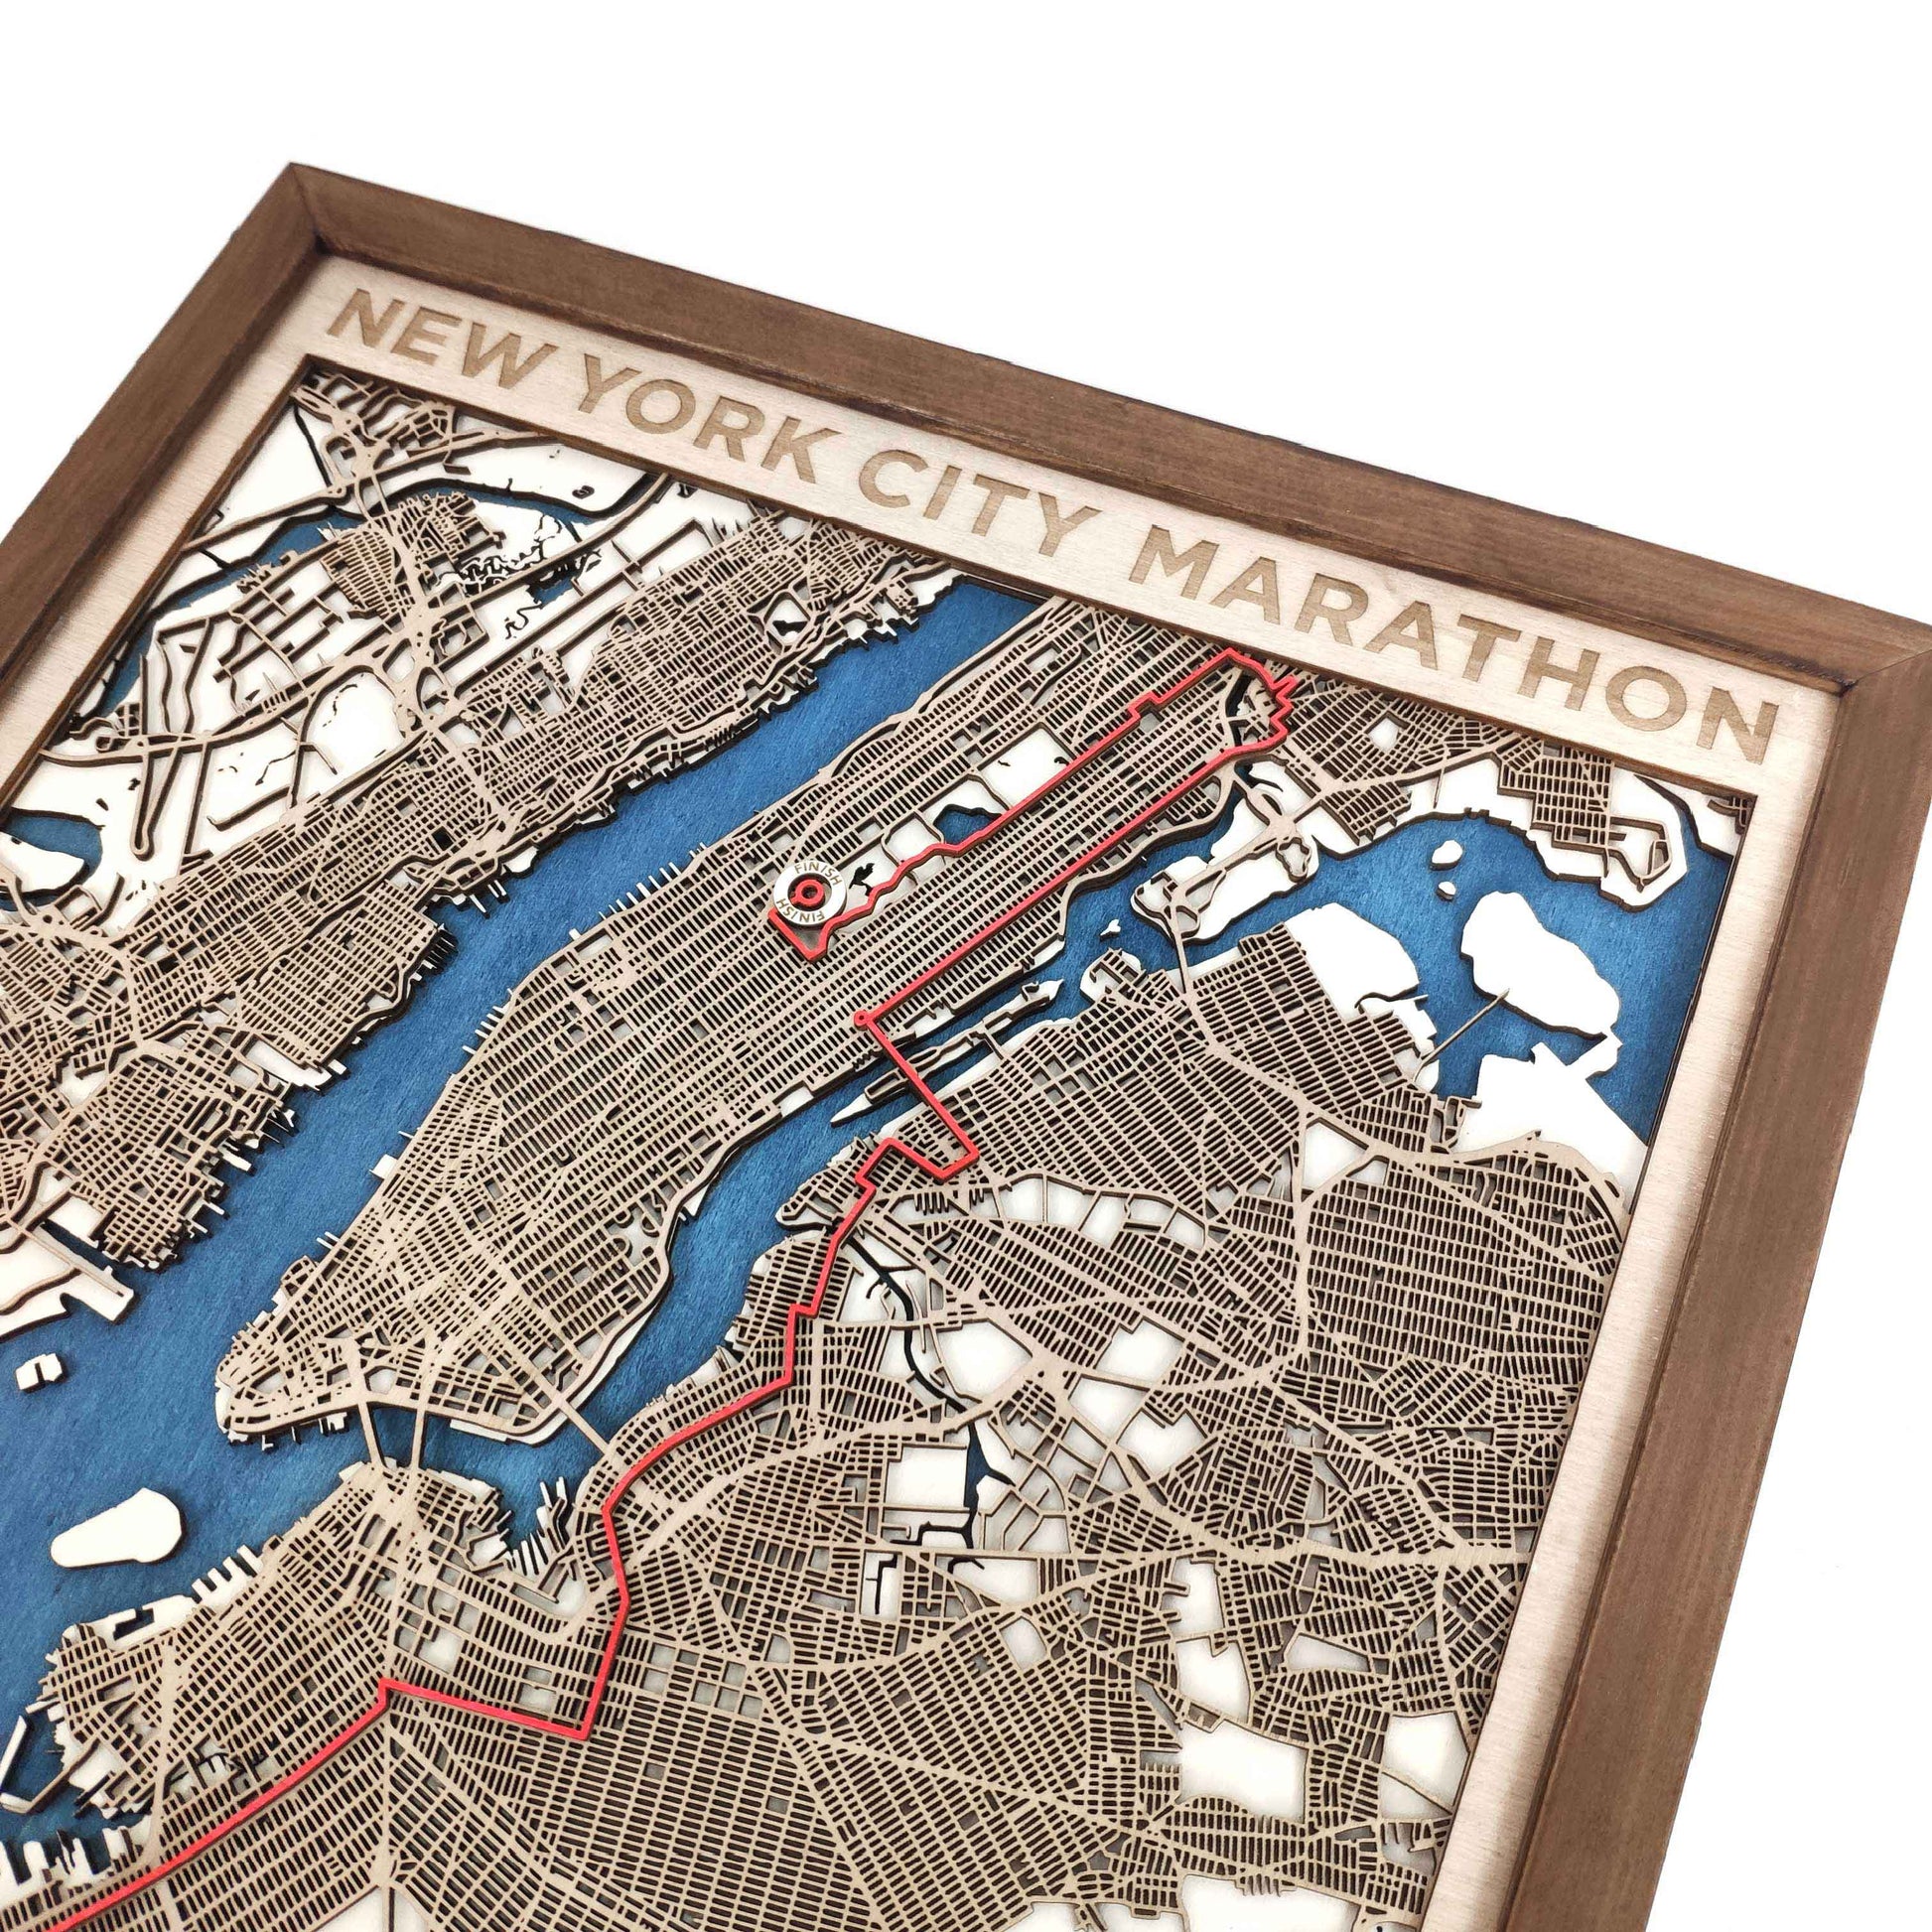 New York City Marathon Laser-Cut Wooden Map – Unique Runner Poster Gift by CityWood - Custom Wood Map Art - Unique Laser Cut Engraved - Anniversary Gift